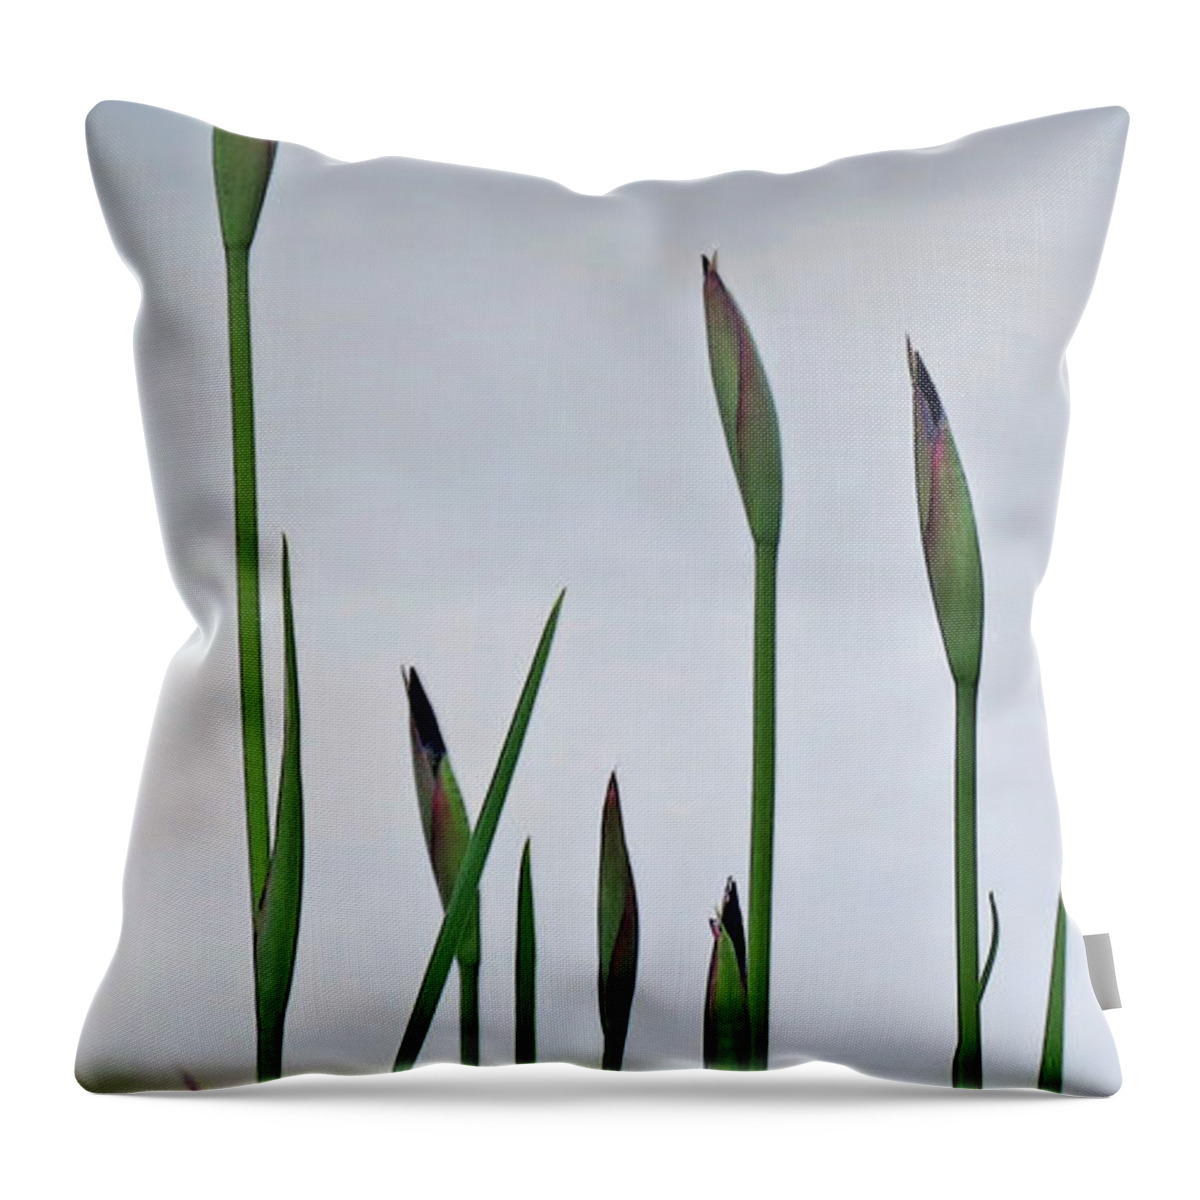 Minimal Throw Pillow featuring the photograph Nature's Grace by Deborah Smith